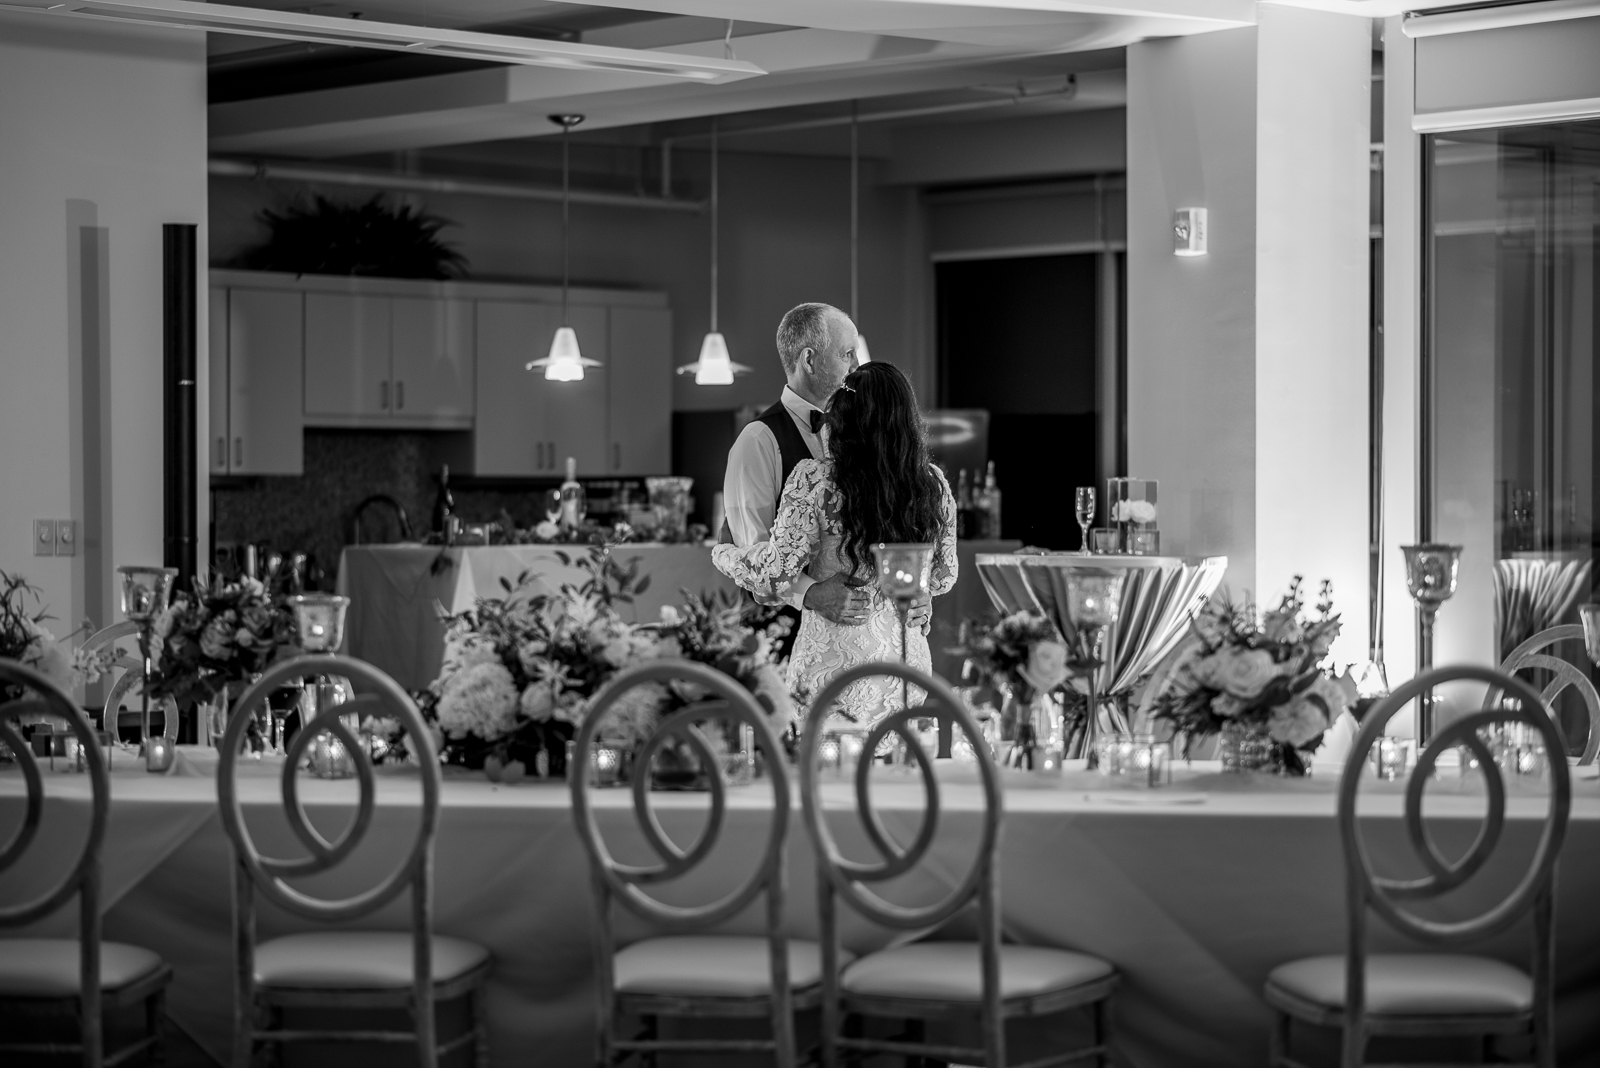 Bride and groom, first dance, romantic, wedding reception decor, African American wedding, urban wedding reception at Penthouse Events, Ohio City, Cleveland Flats